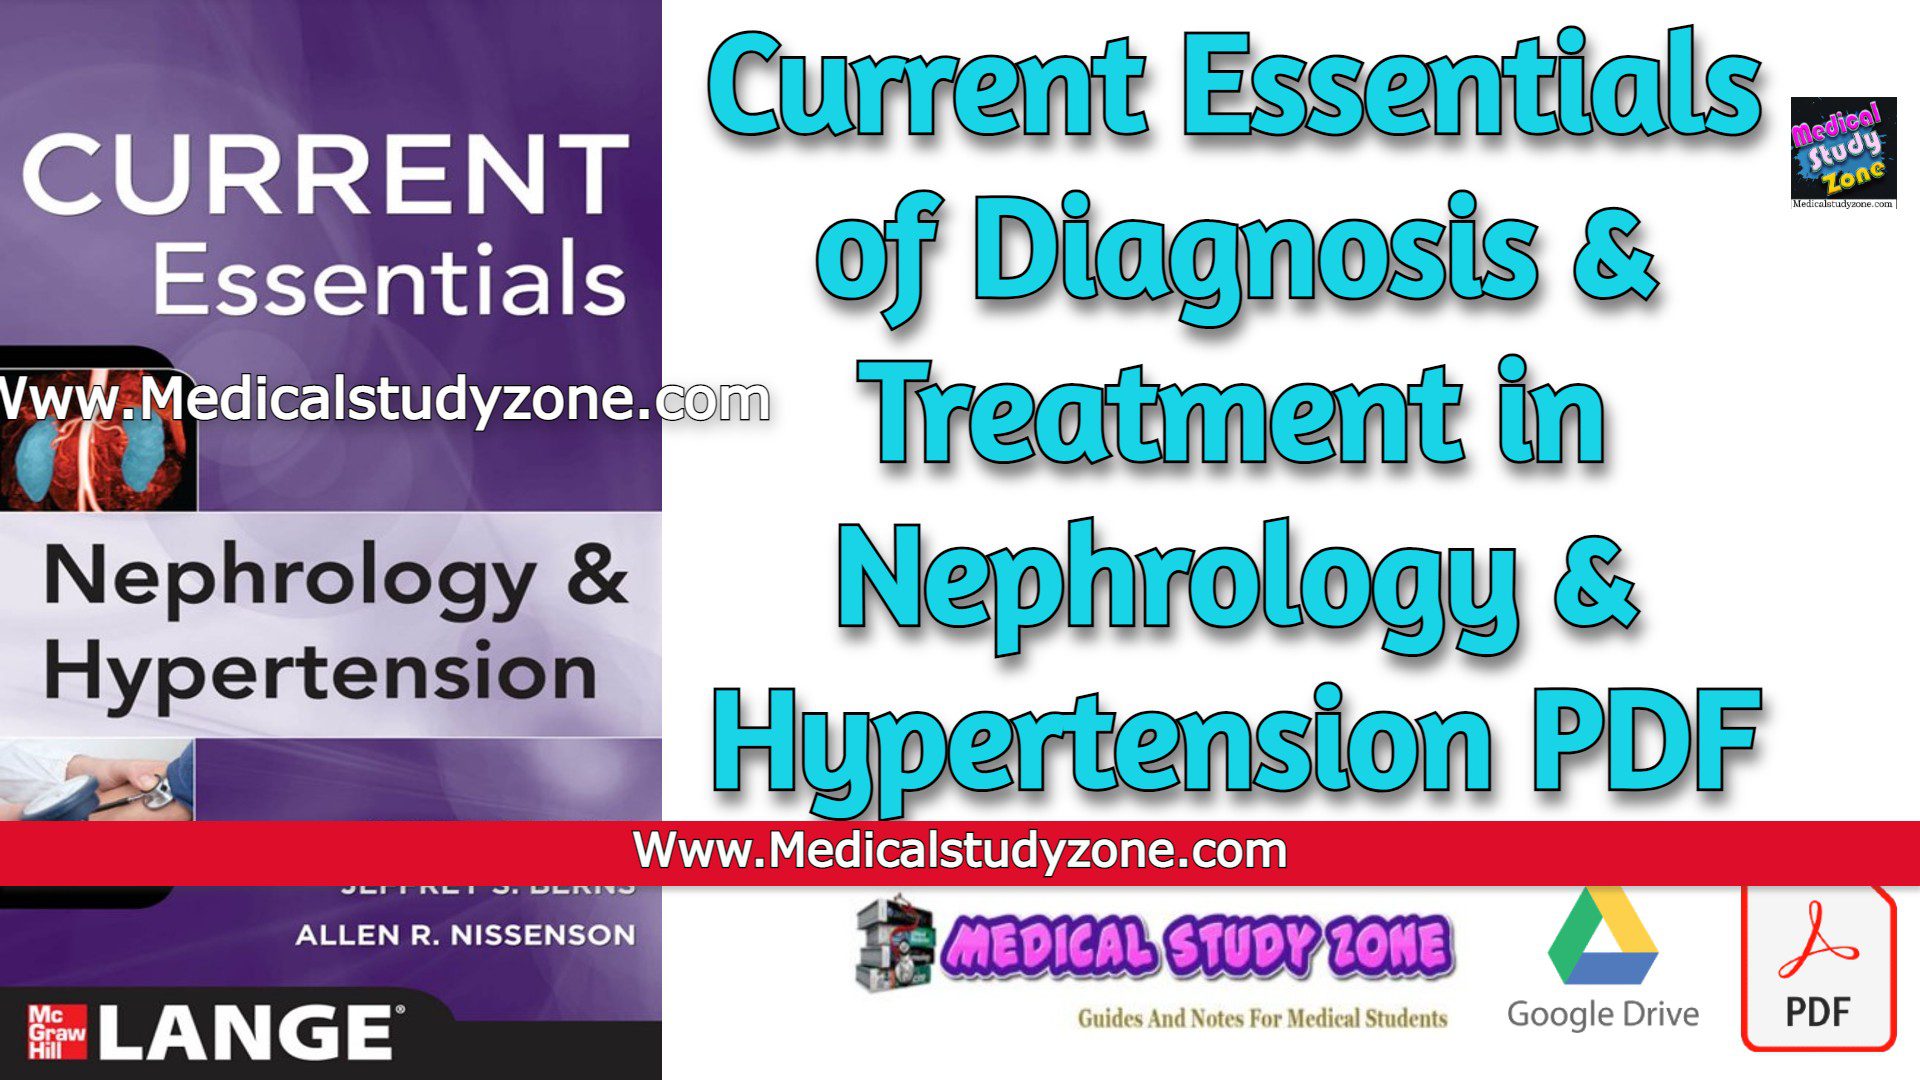 Current Essentials of Diagnosis & Treatment in Nephrology & Hypertension PDF Free Download